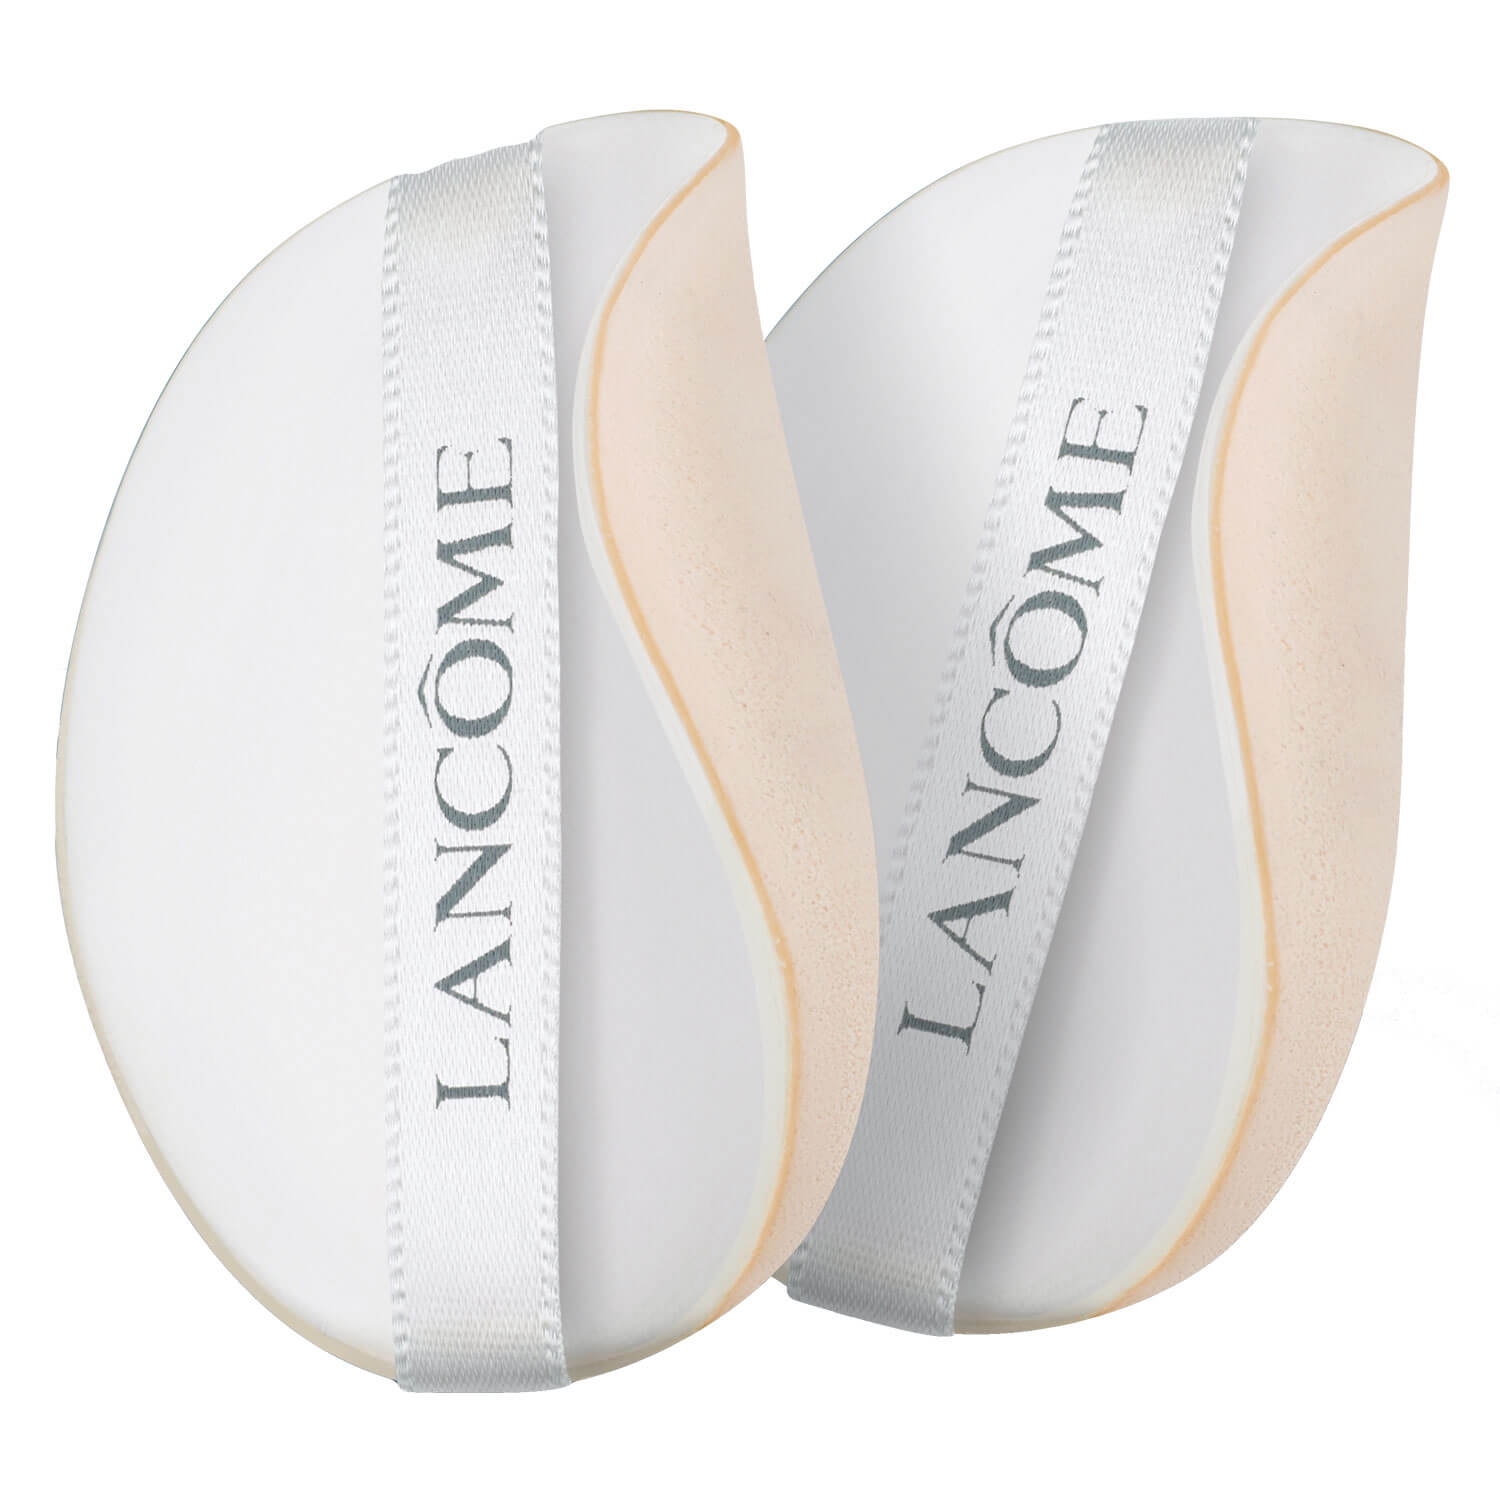 Product image from Miracle Cushion - Miracle Cushion Applicateur